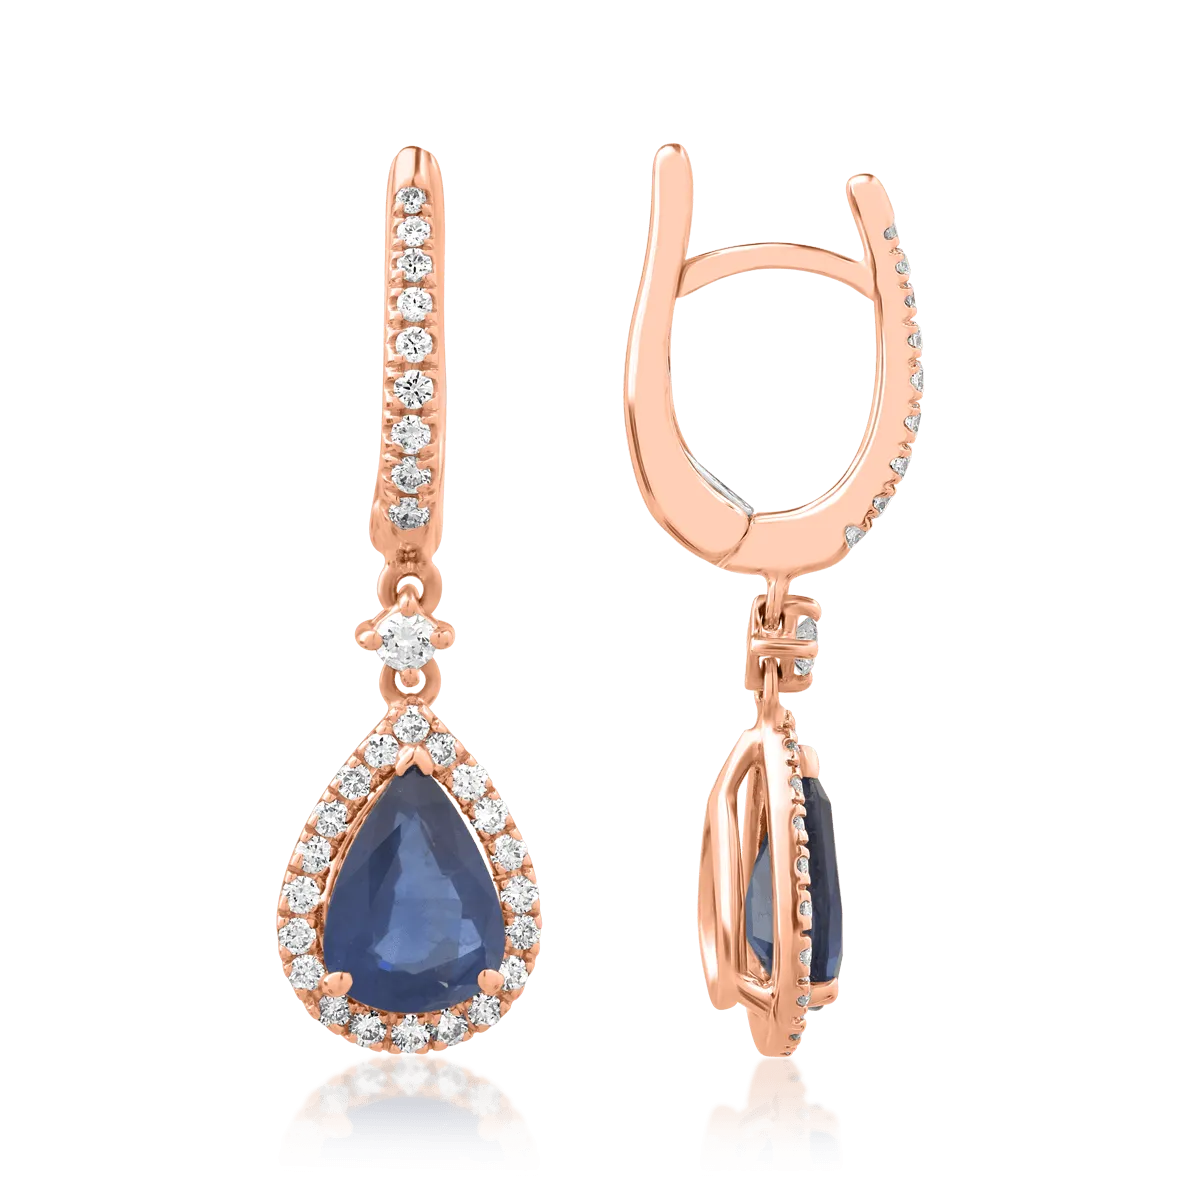 18K rose gold earrings with 2.13ct sapphires and 0.46ct diamonds